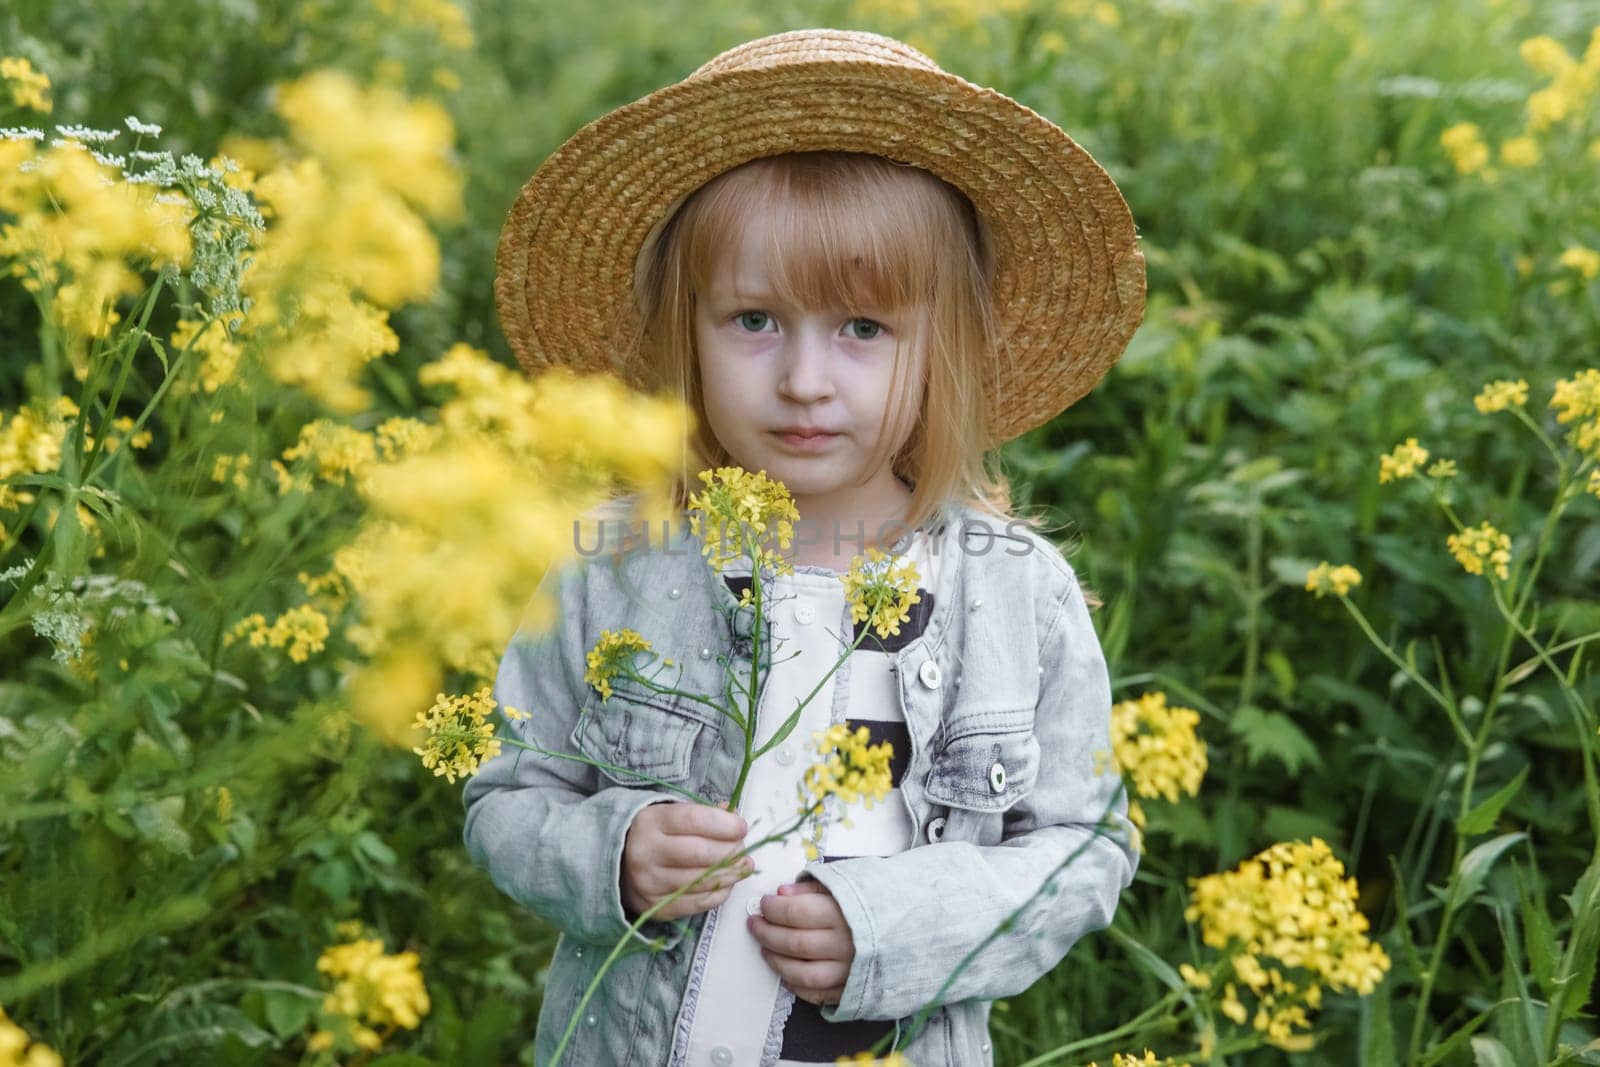 Blonde girl in a field with yellow flowers. A girl in a straw hat is picking flowers in a field. A field with rapeseed. by Annu1tochka